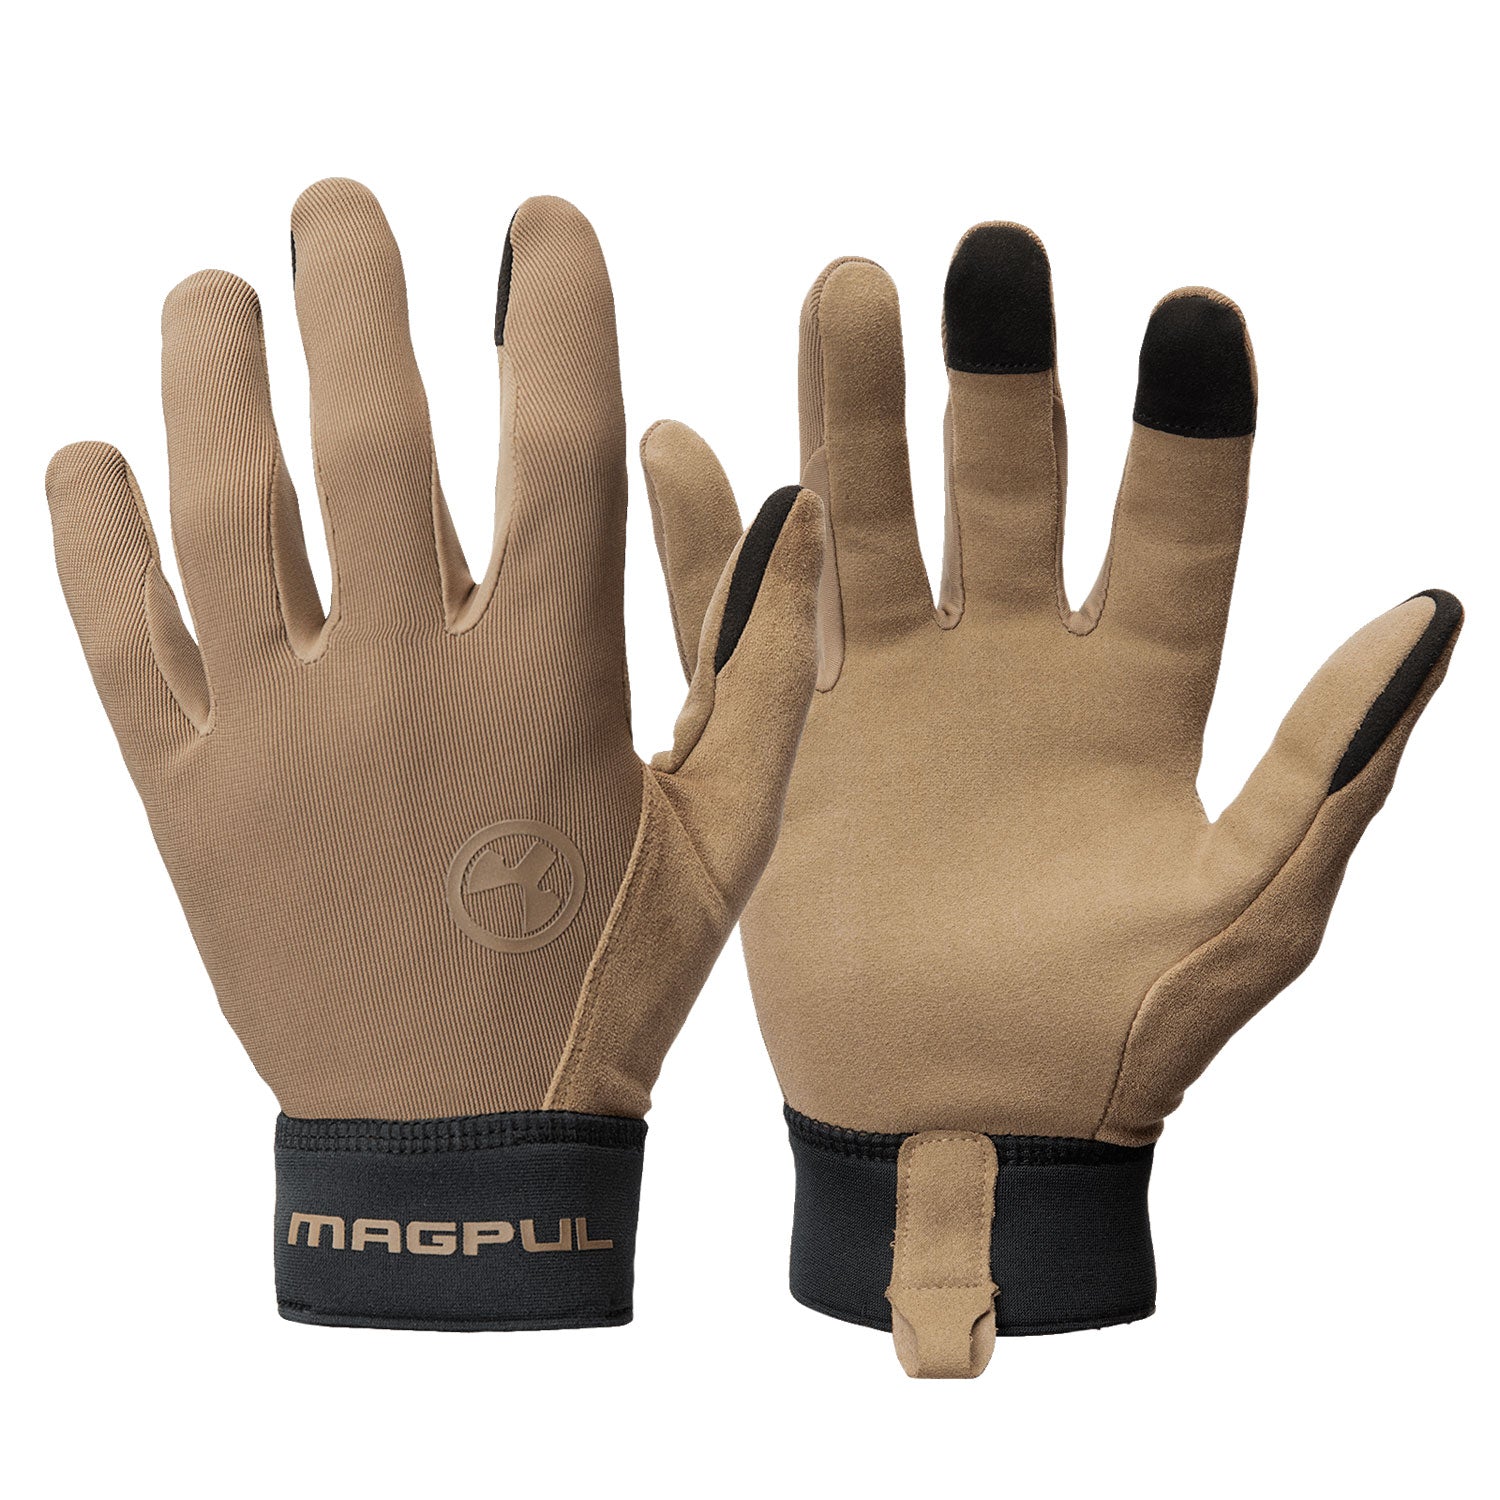 Magpul MAG1014-251-M Technical Glove 2.0 Coyote